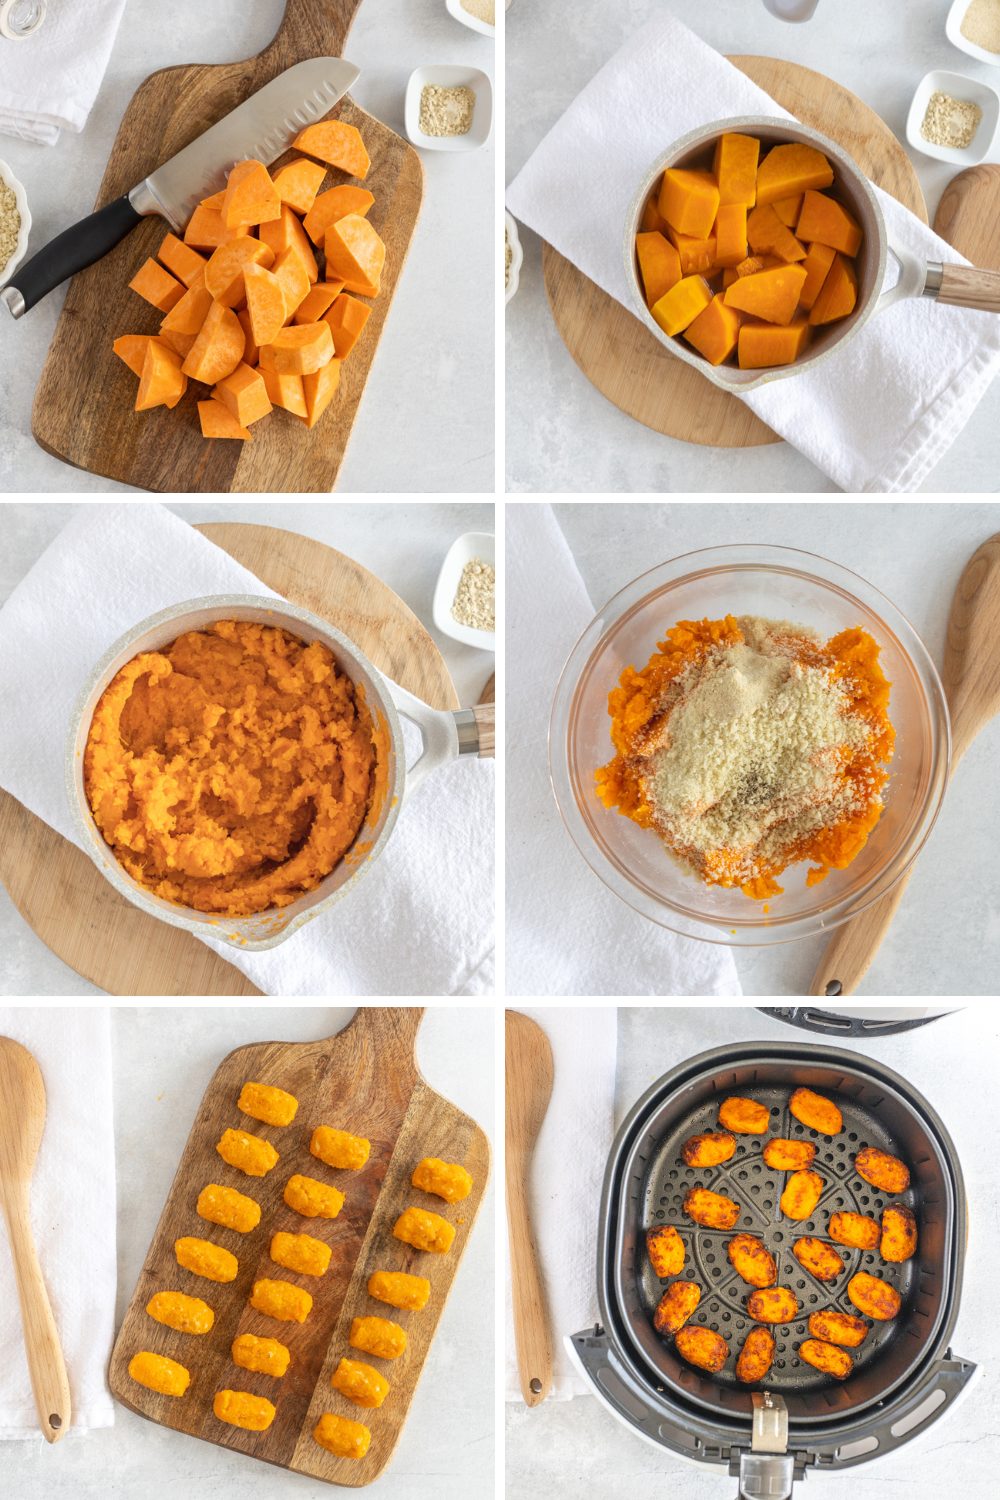 How to Make Sweet Potato Tots in Air Fryer